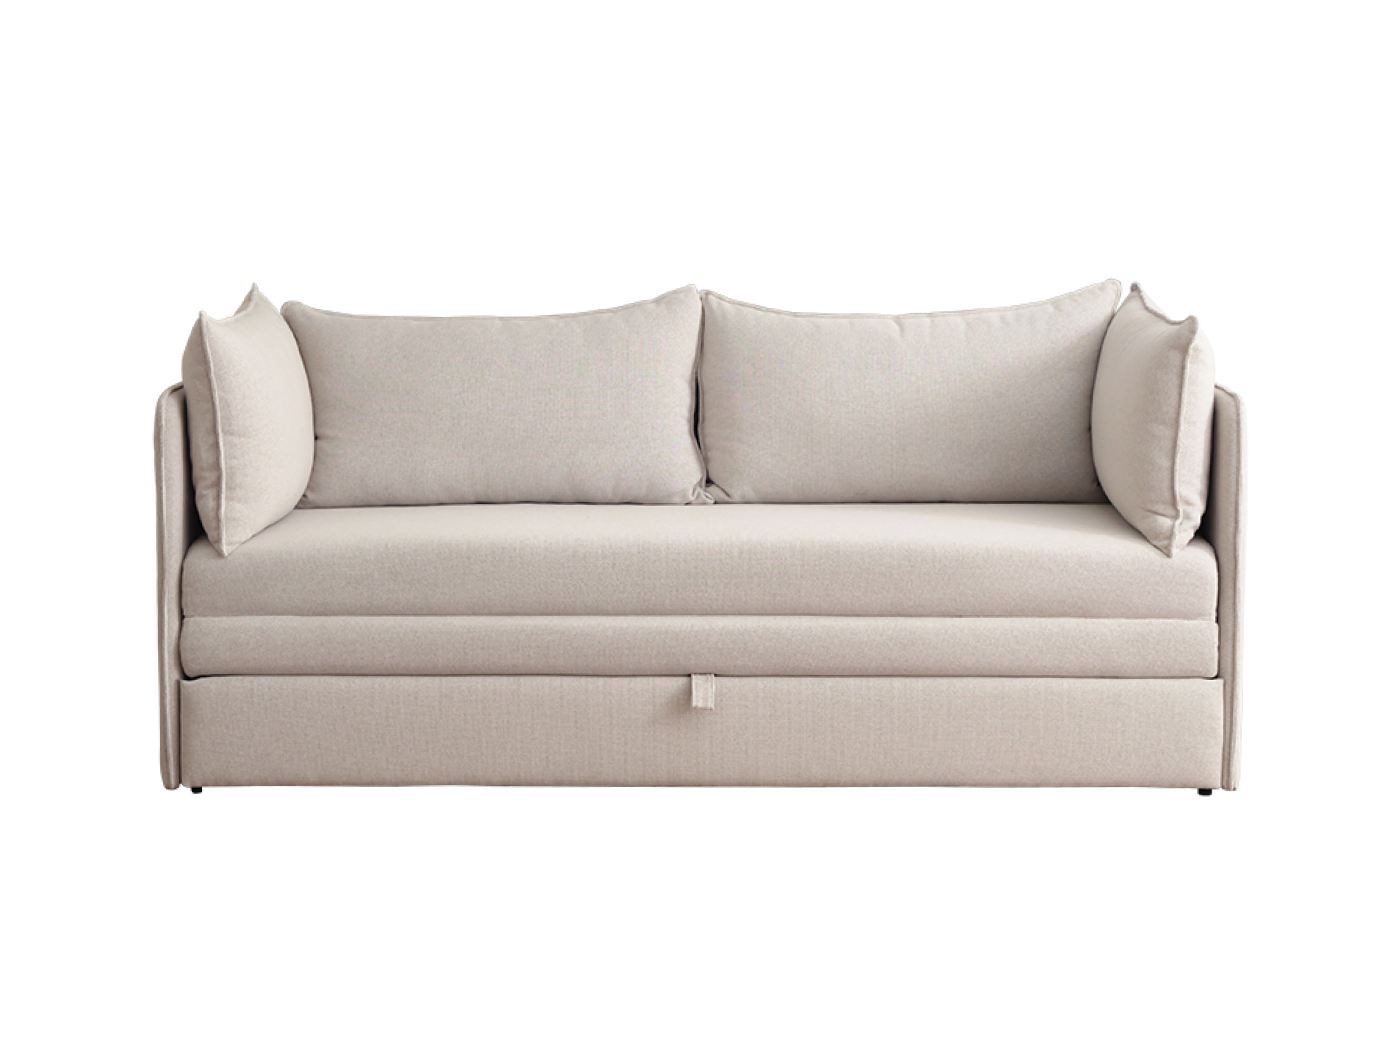 Sofa Bed Most Awarded Beds